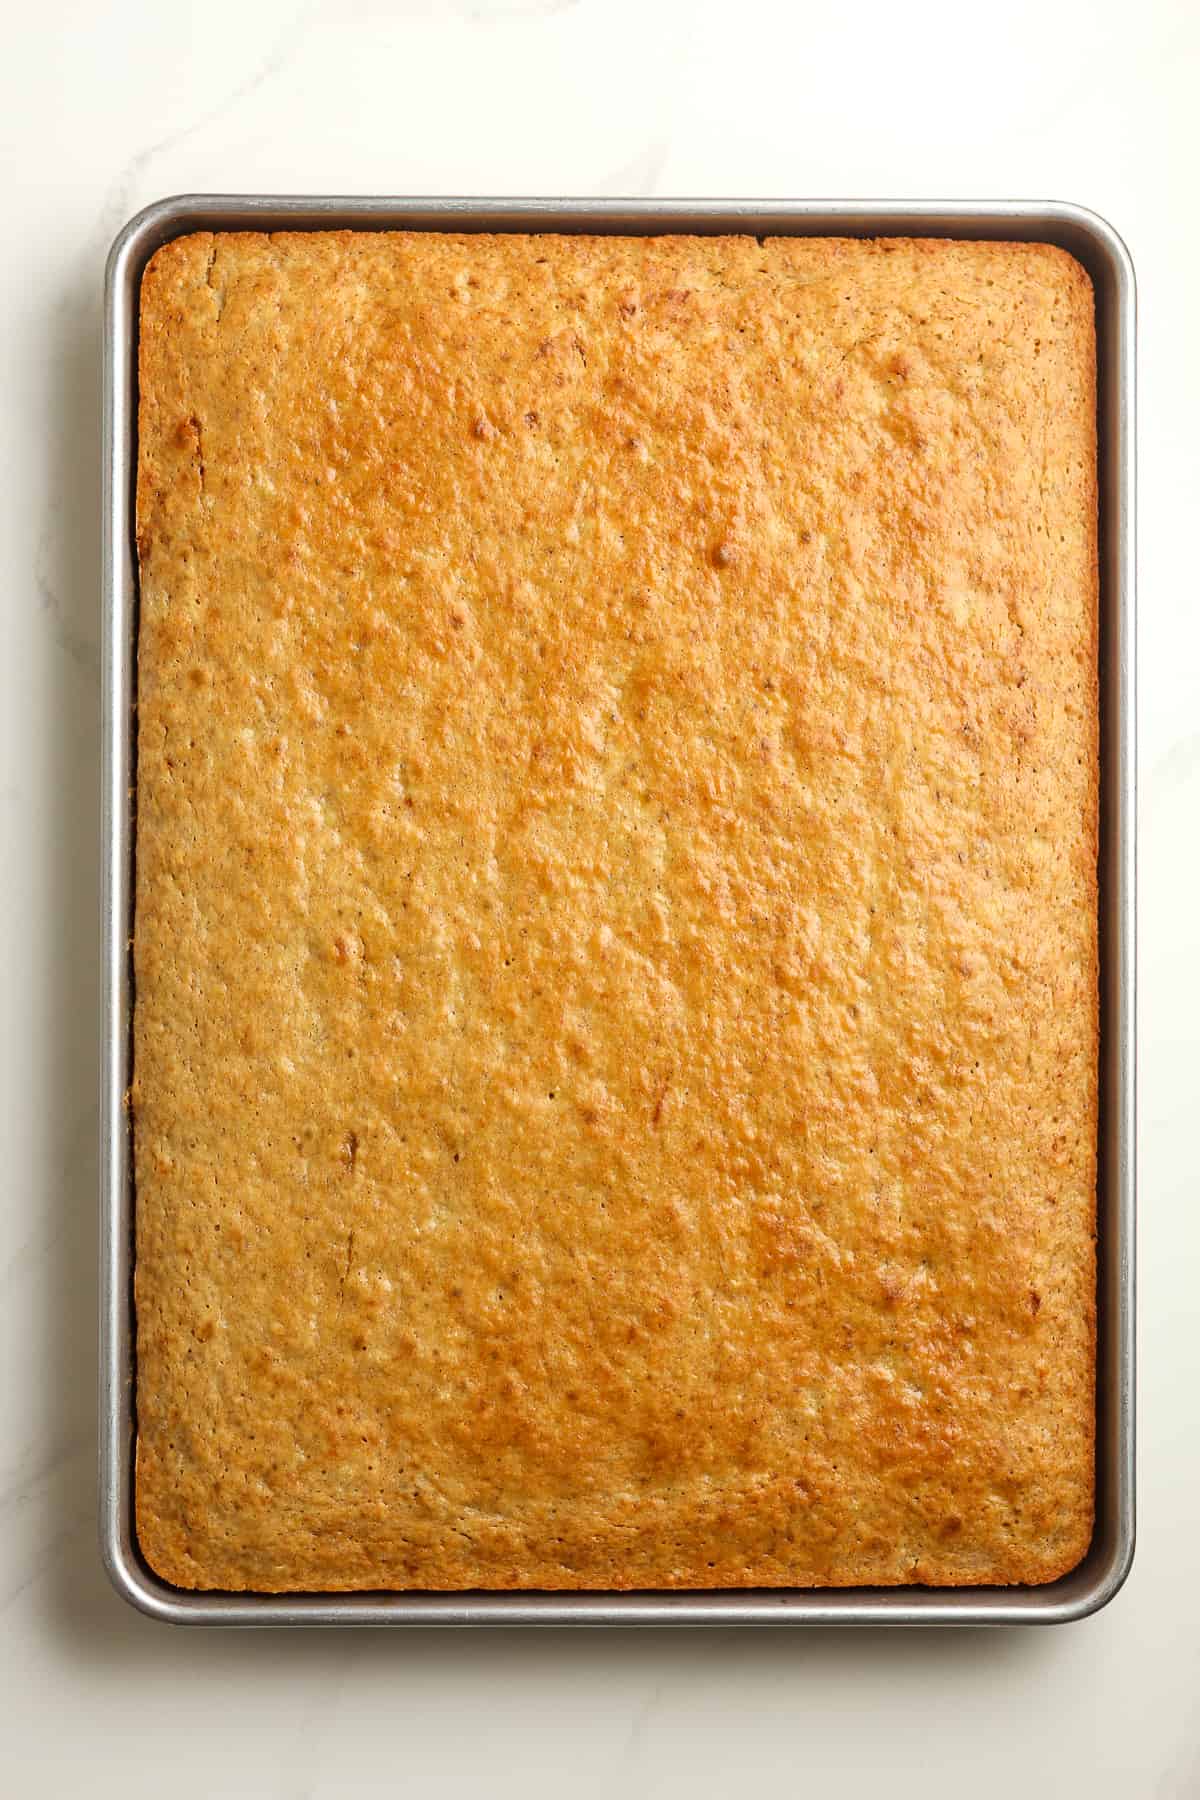 A sheet pan of the banana cake before frosting.